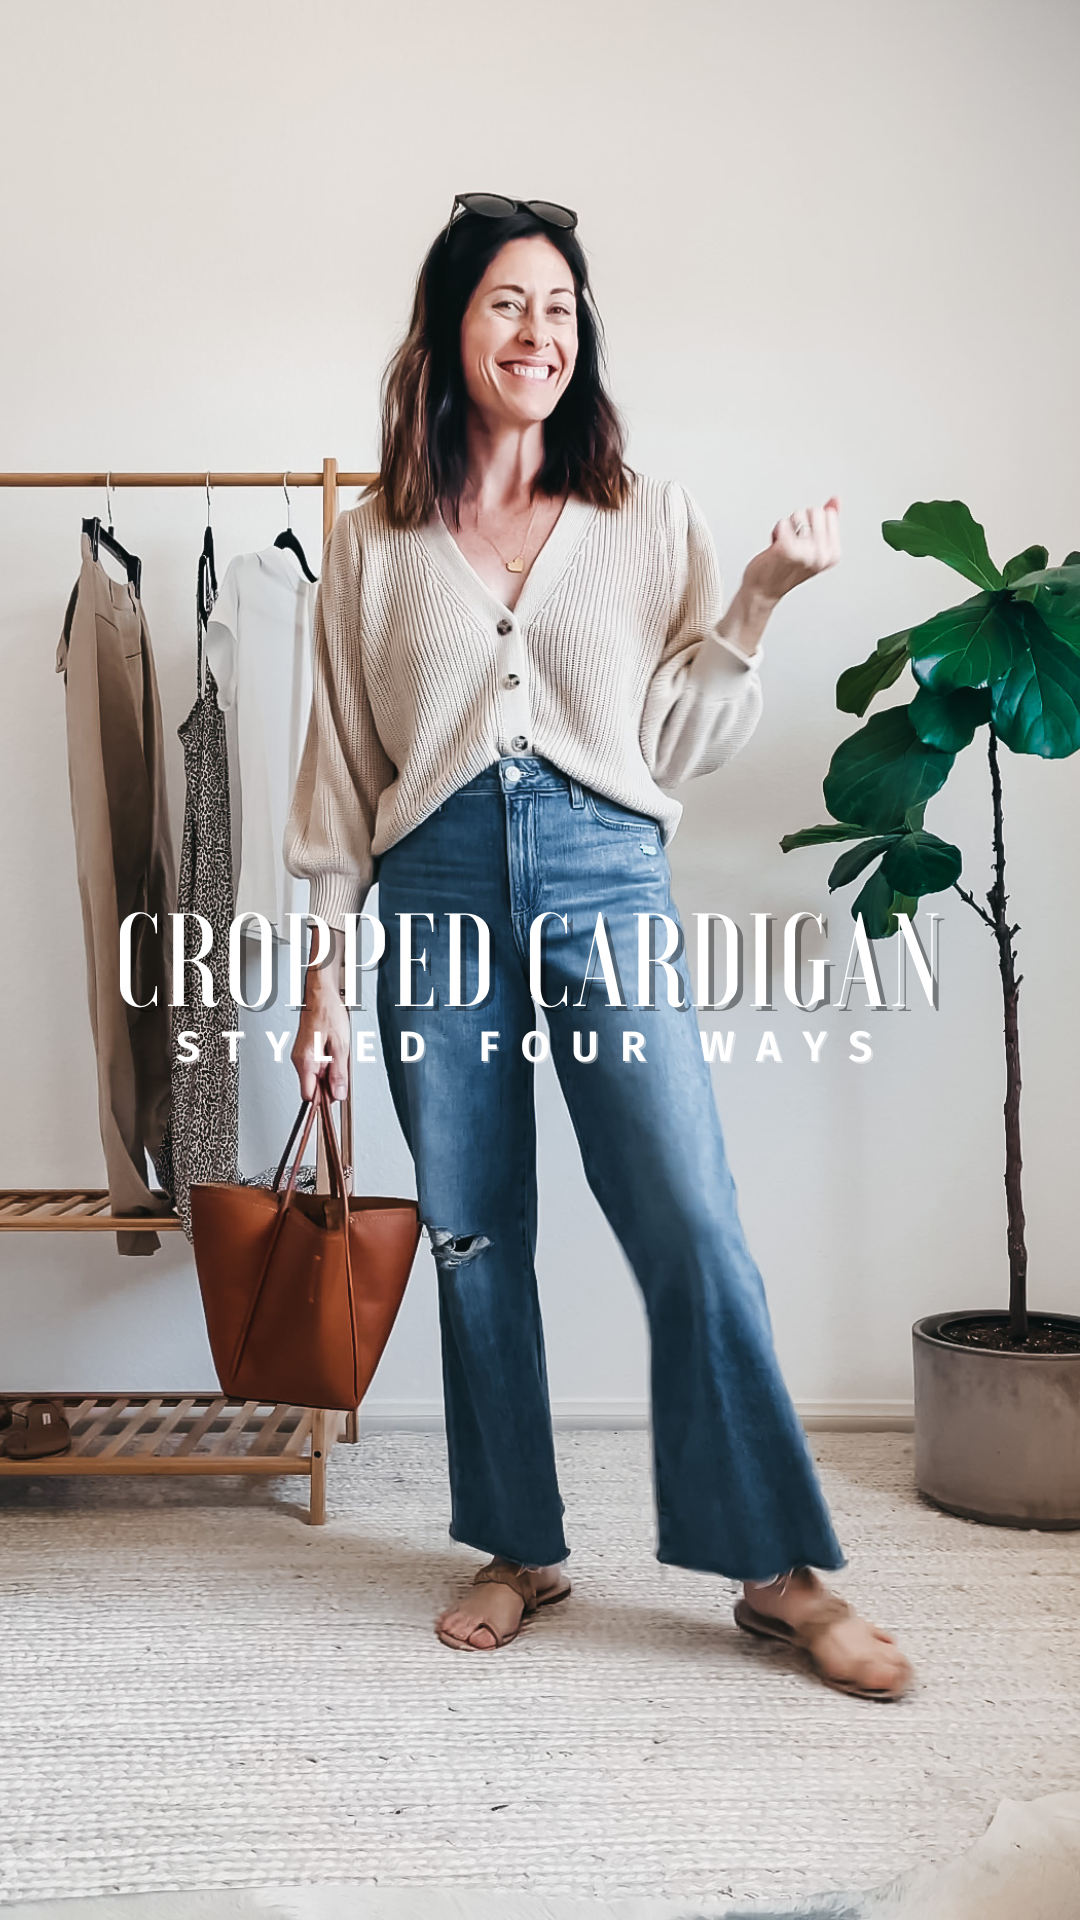 How To Wear A Cropped Cardigan?